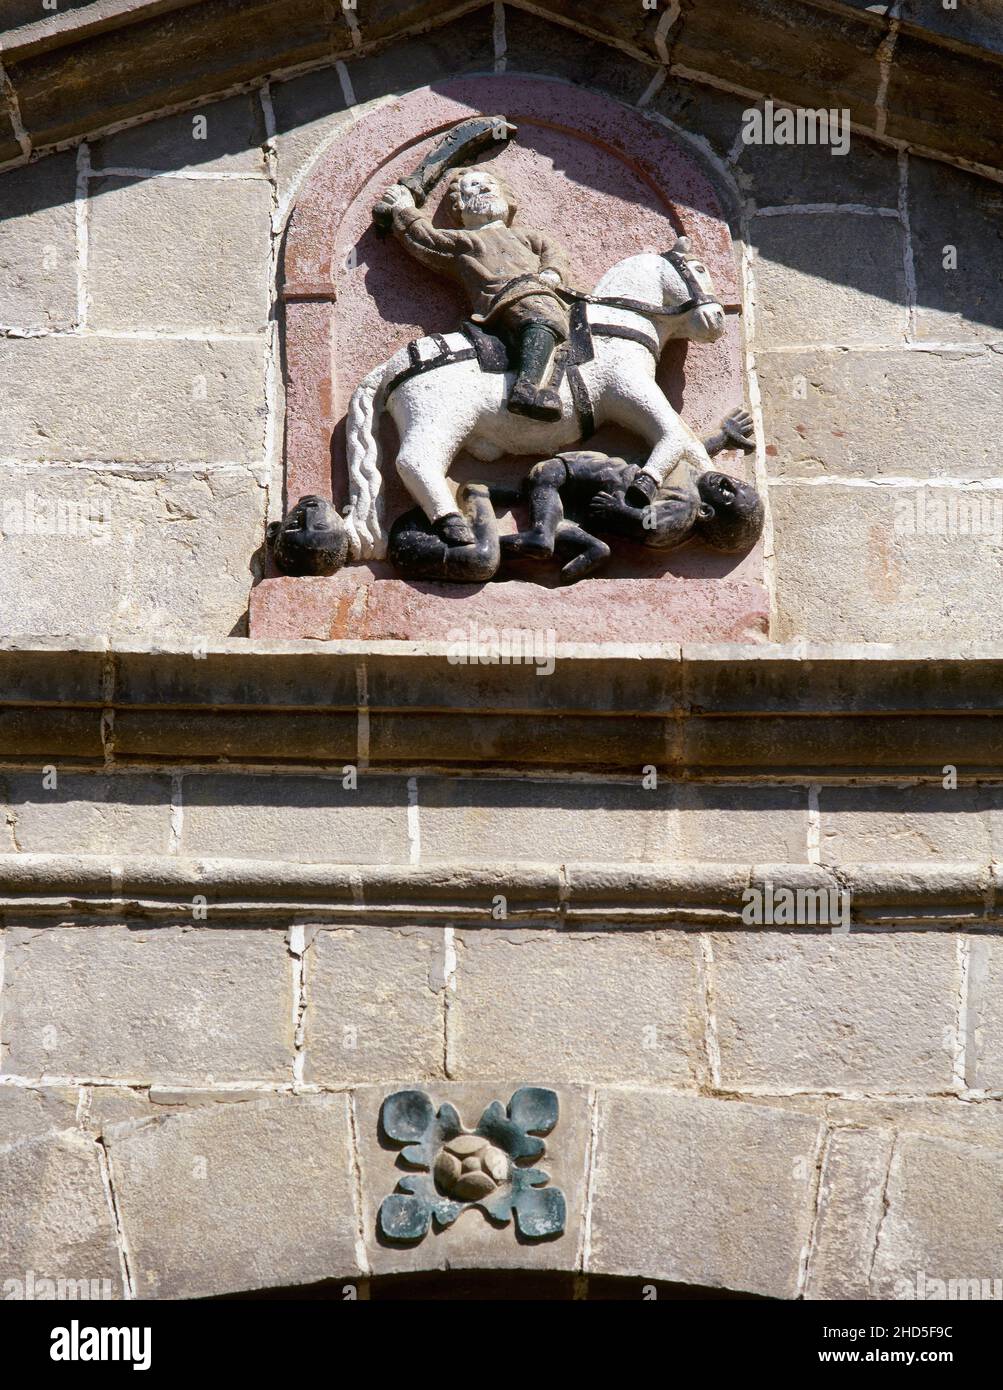 Spain, Basque Country, province of Biscay, Zeberio (Ceberio). Saint James the Moor-slayer (Santiago Matamoros) on horseback victorious over the infidels. Sculpture in the tympanum of the Chapel of Saint Anthony of Padua. Stock Photo